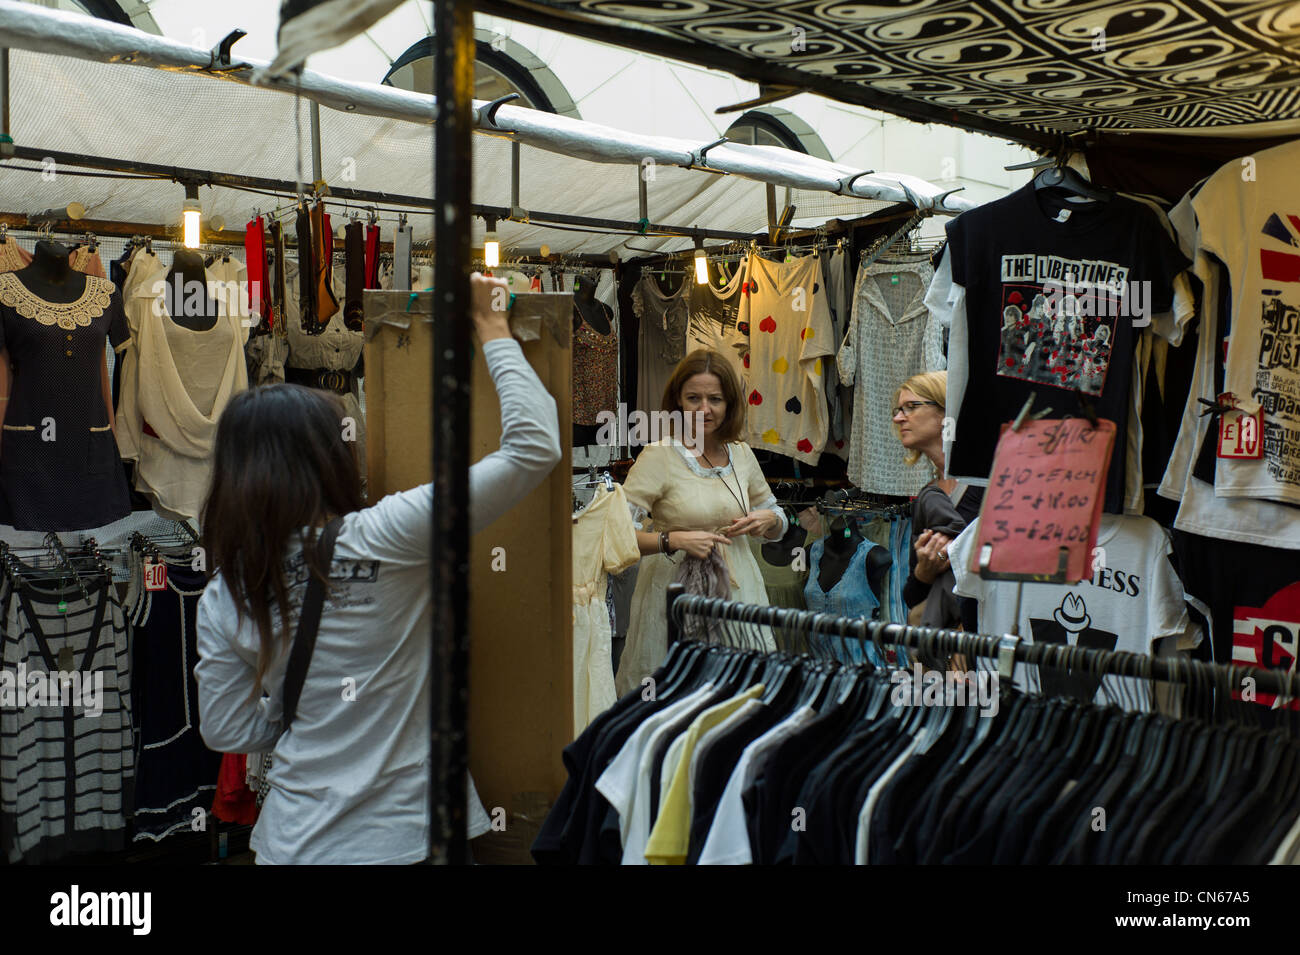 Shopper, tourist, buying cloths, and t-shirts in Camden Market, Camden Town, London, England Stock Photo